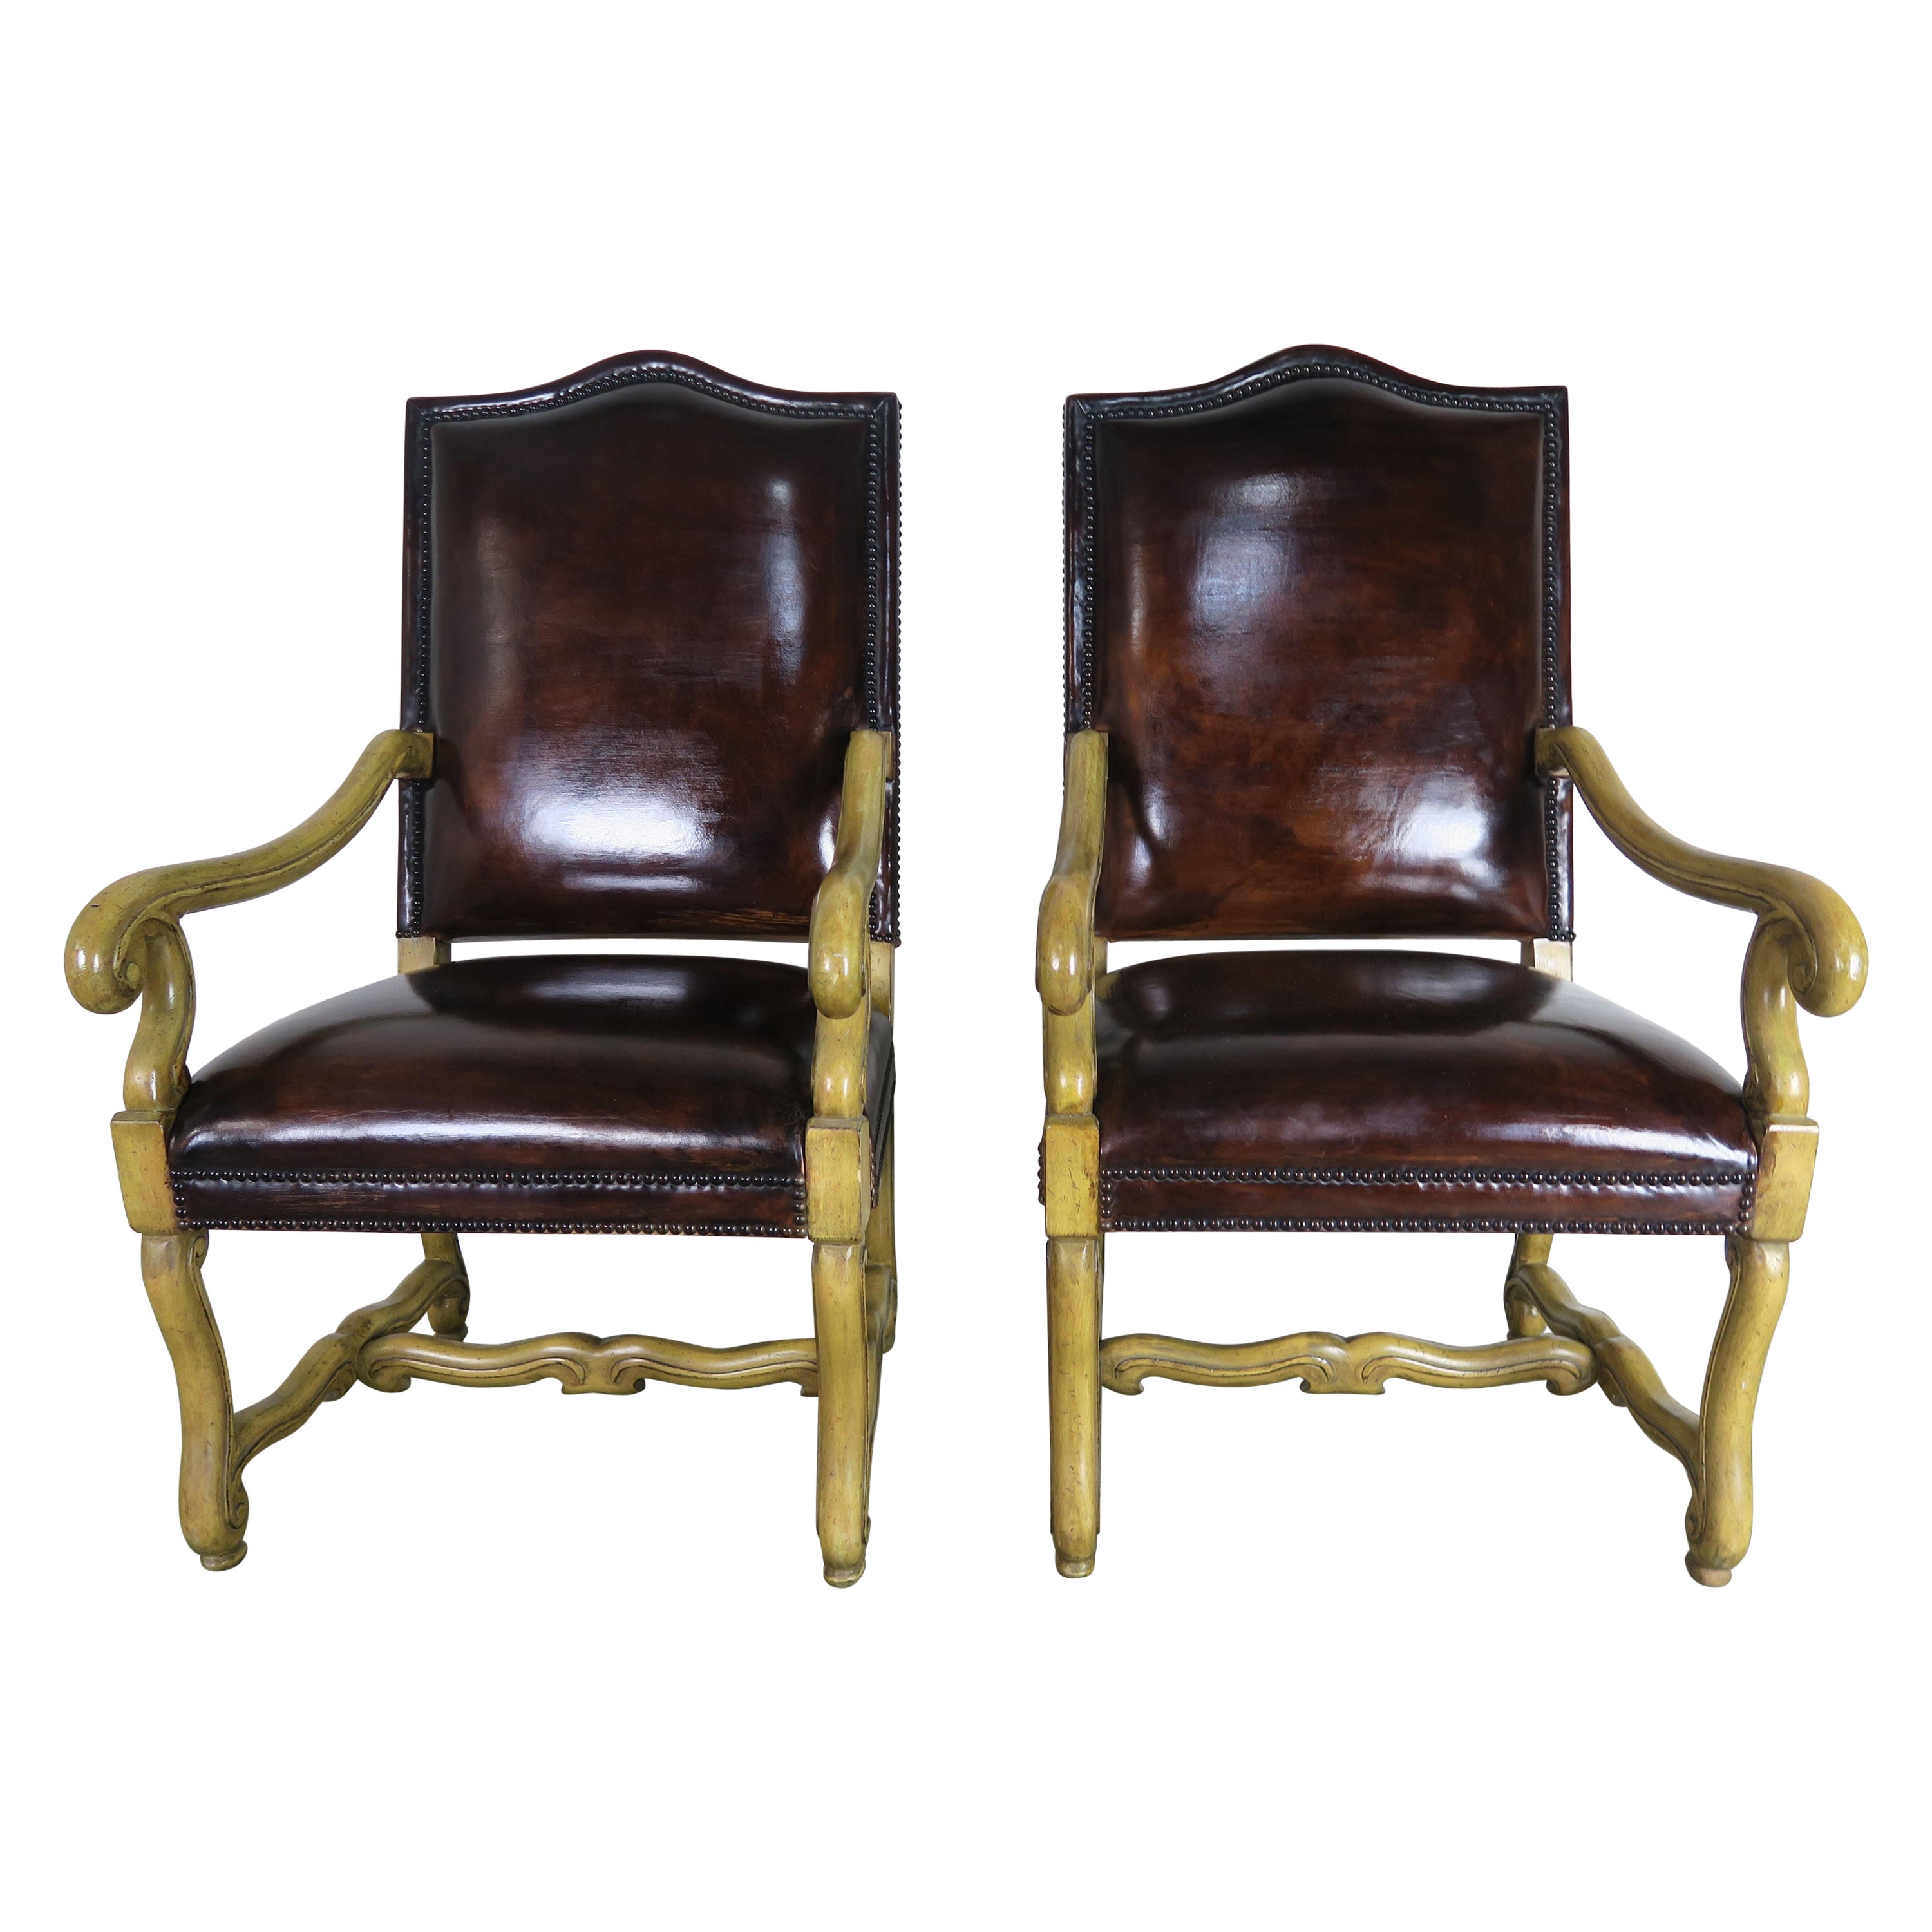 Pair of Spanish Leather Upholstered Armchairs C. 1900's